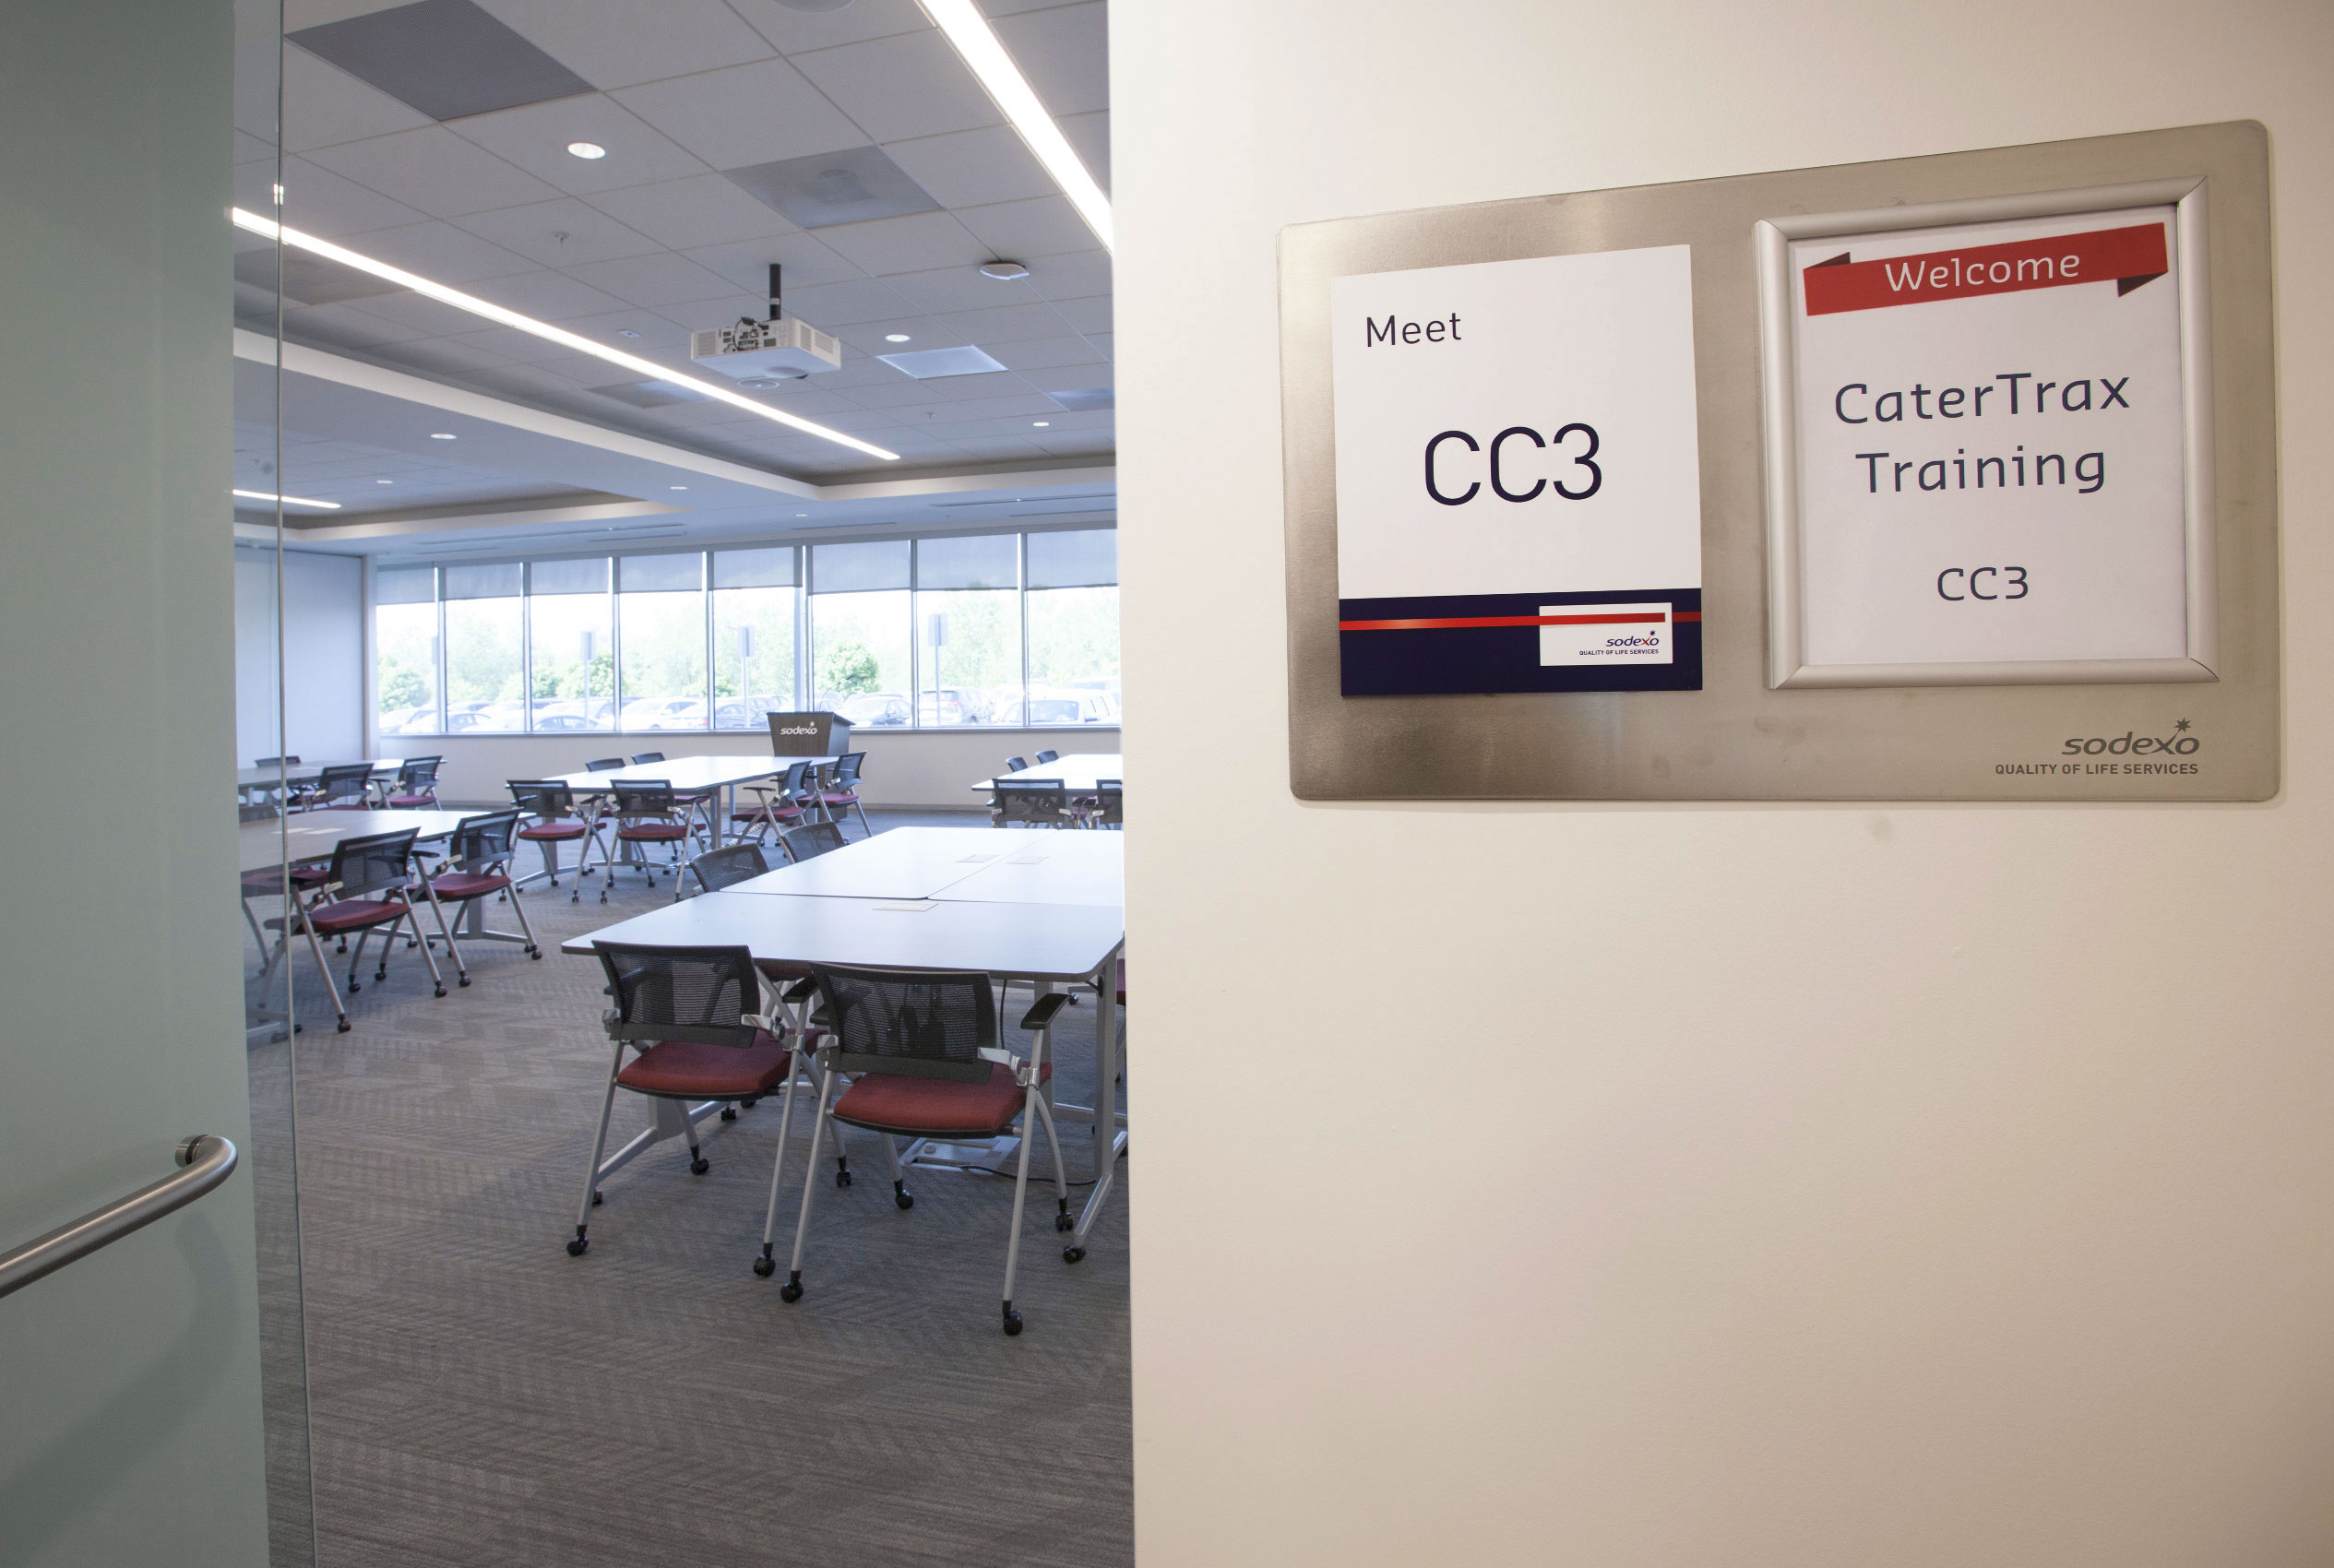 Conference room with stainless steel plaque with Sodexo logo signage